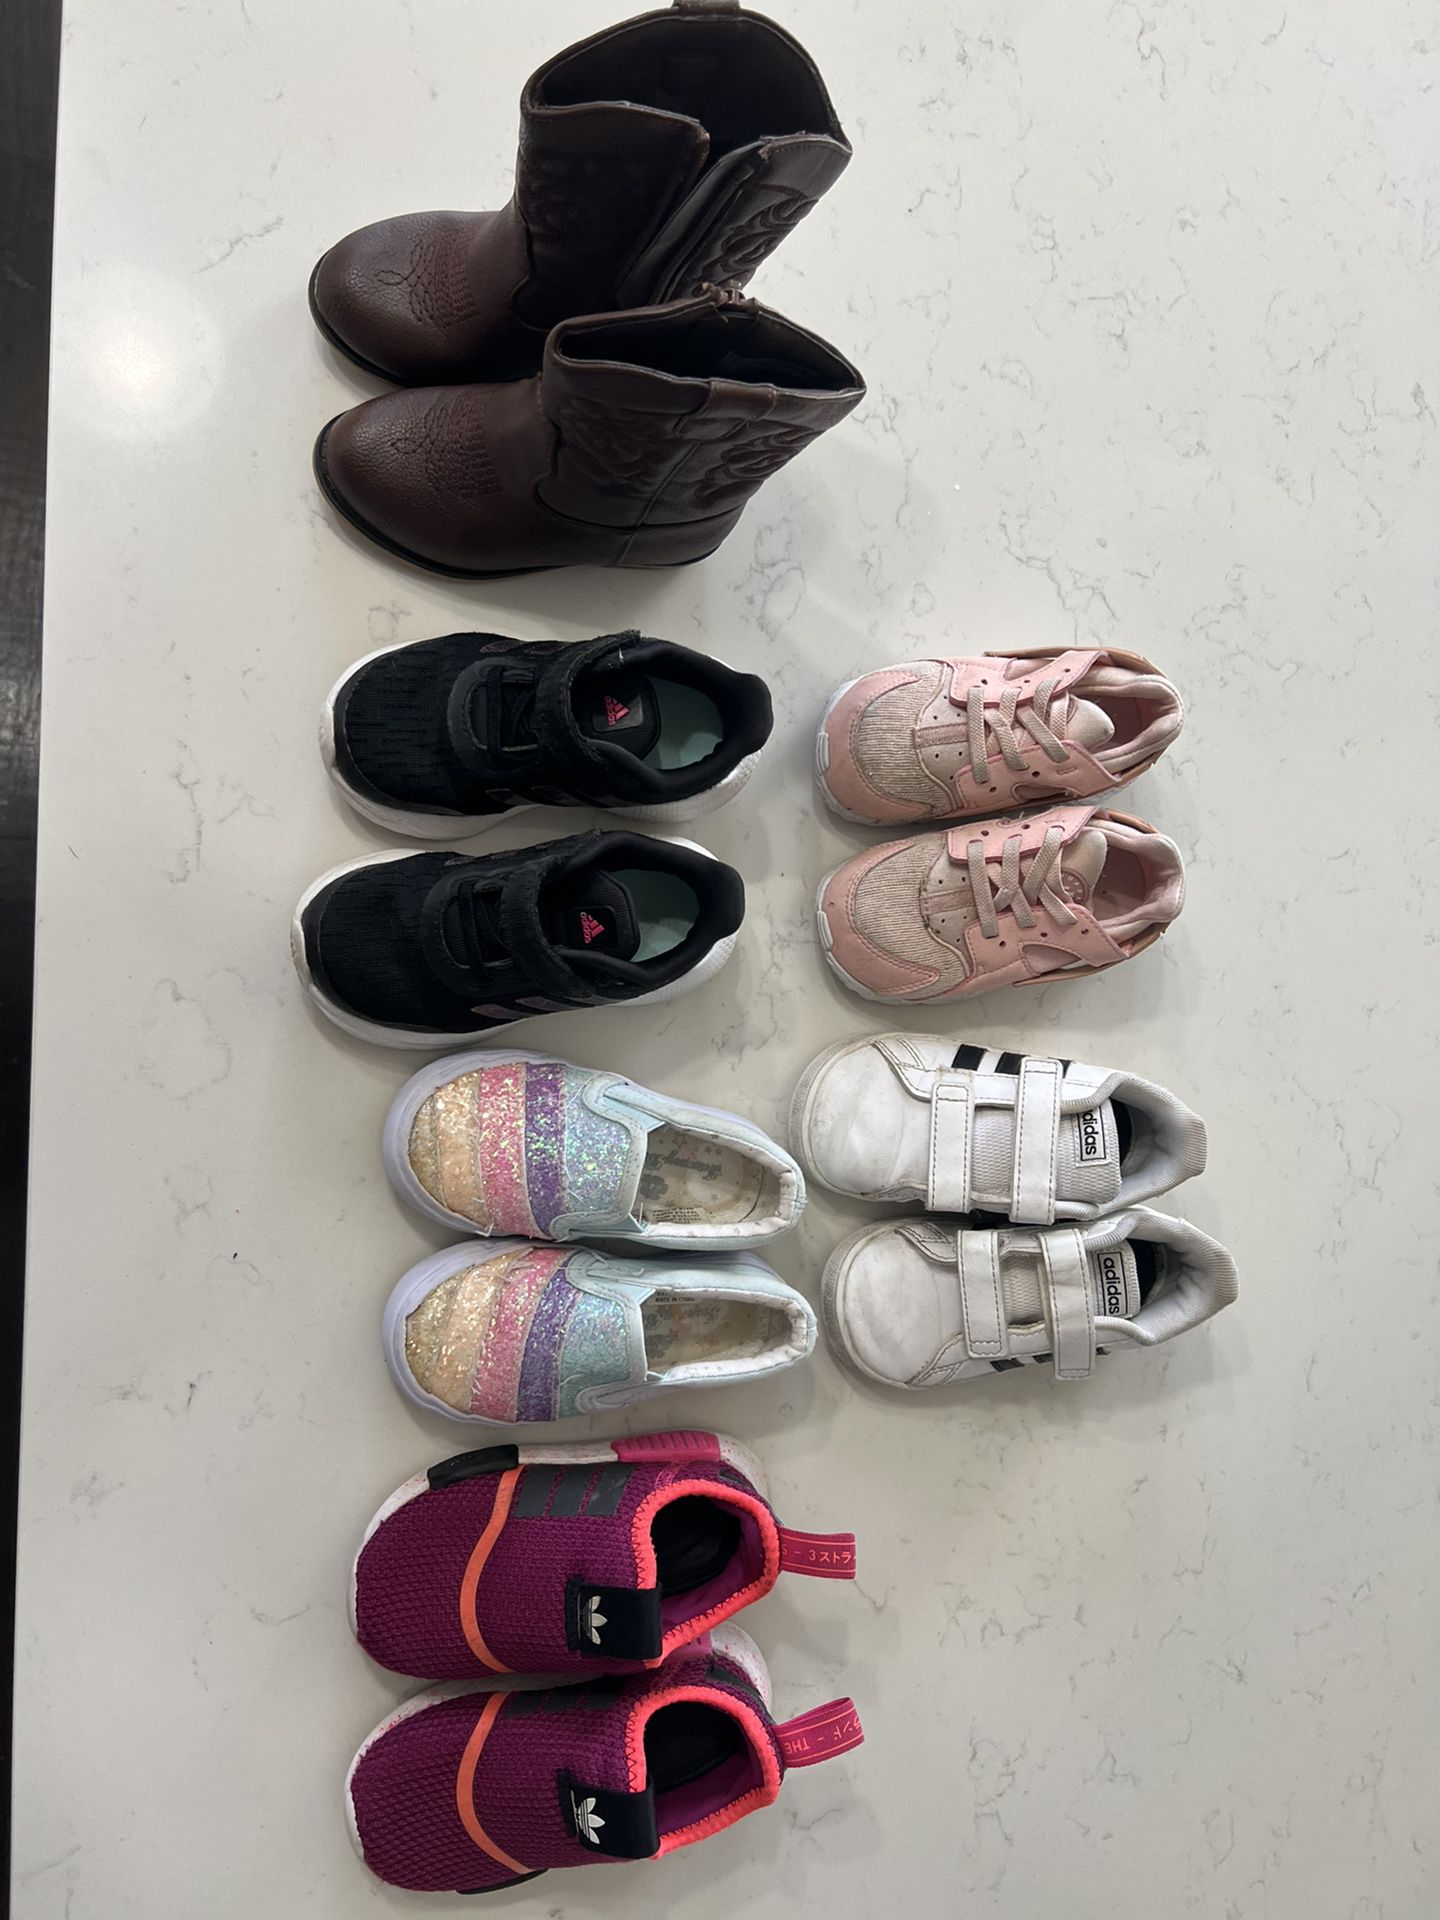 Toddler Girl Shoes/boots ! 7c